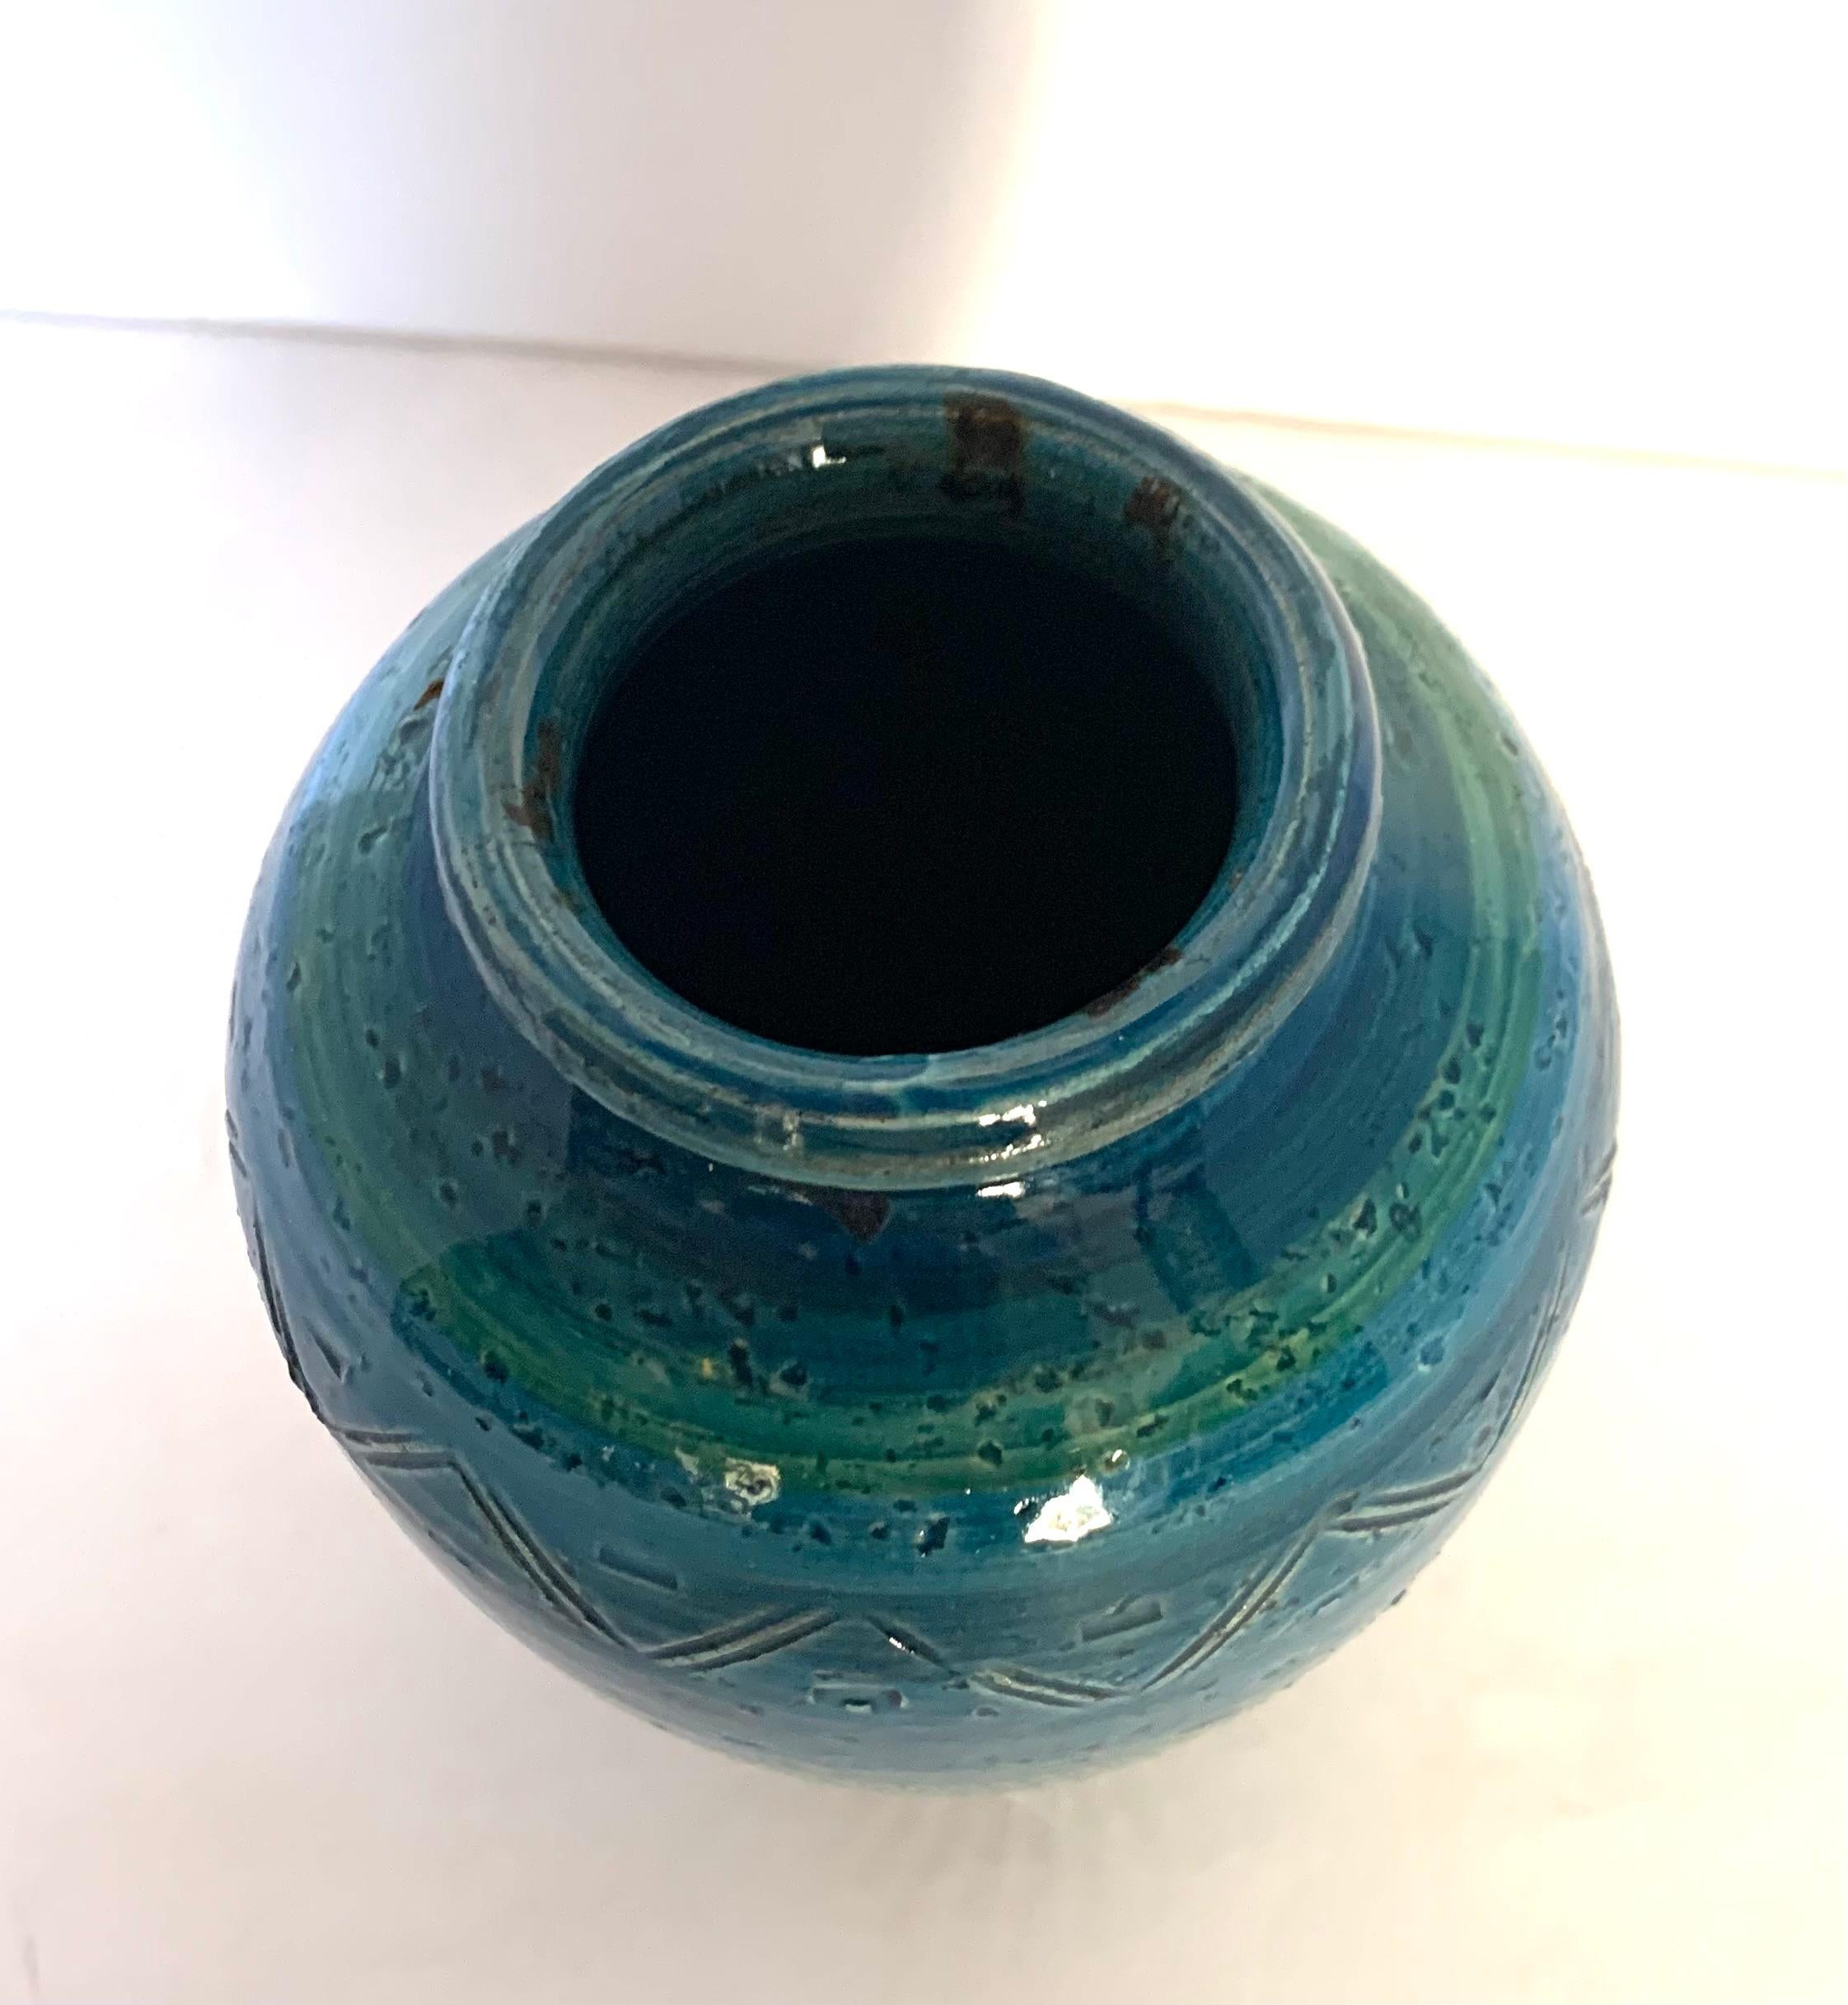 Mid century French bright blue glazed vase with chevron pattern design.
Accented green stripe.
Can hold water.
From a large collection.